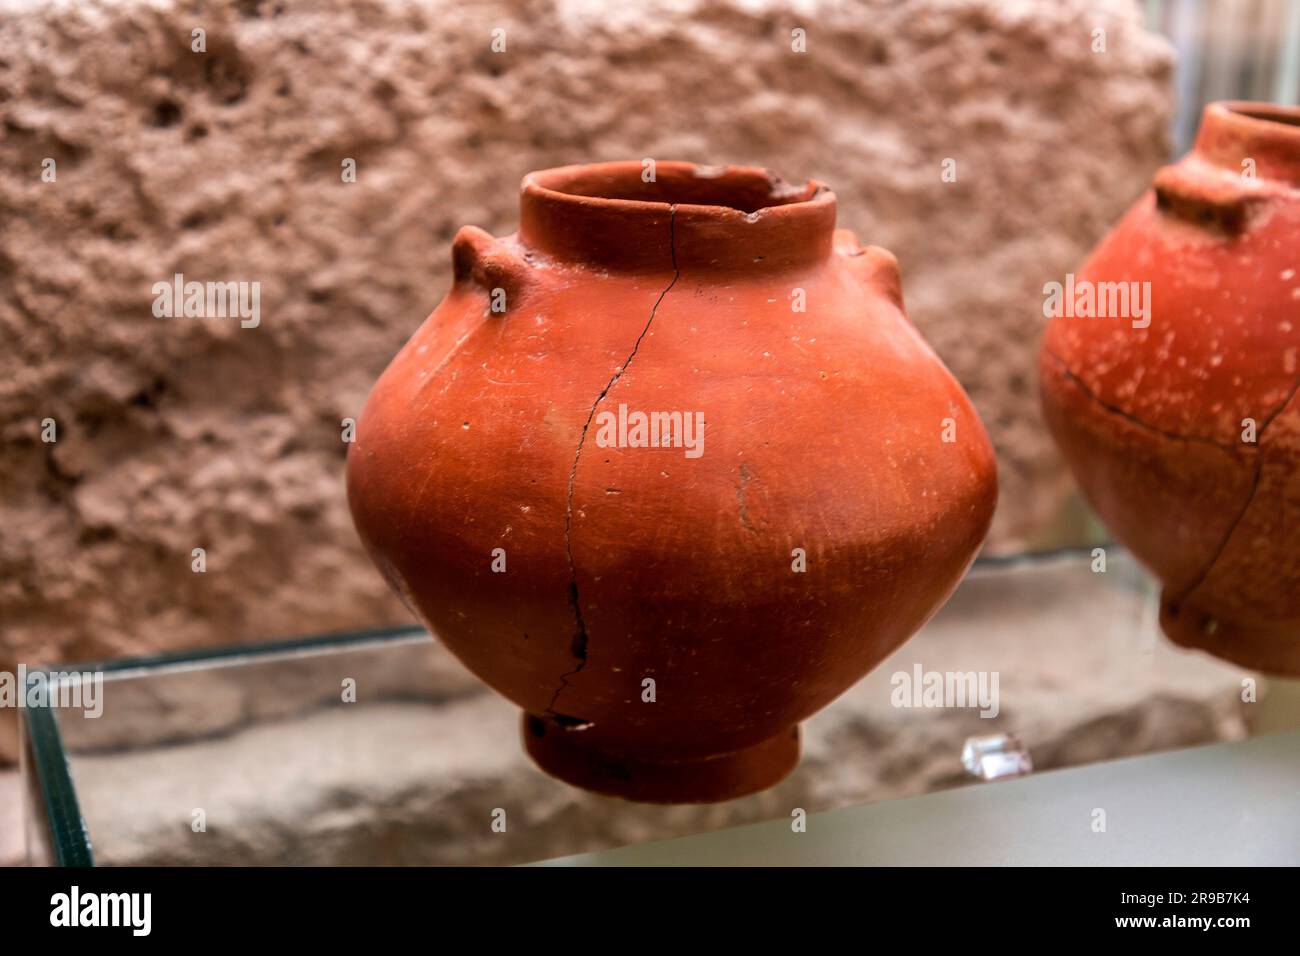 Athens, Greece - 25 Nov 2021: The ancient artifacts displayed at the Stoa of Attalos, a covered portico in the Agora of Athens. Stock Photo